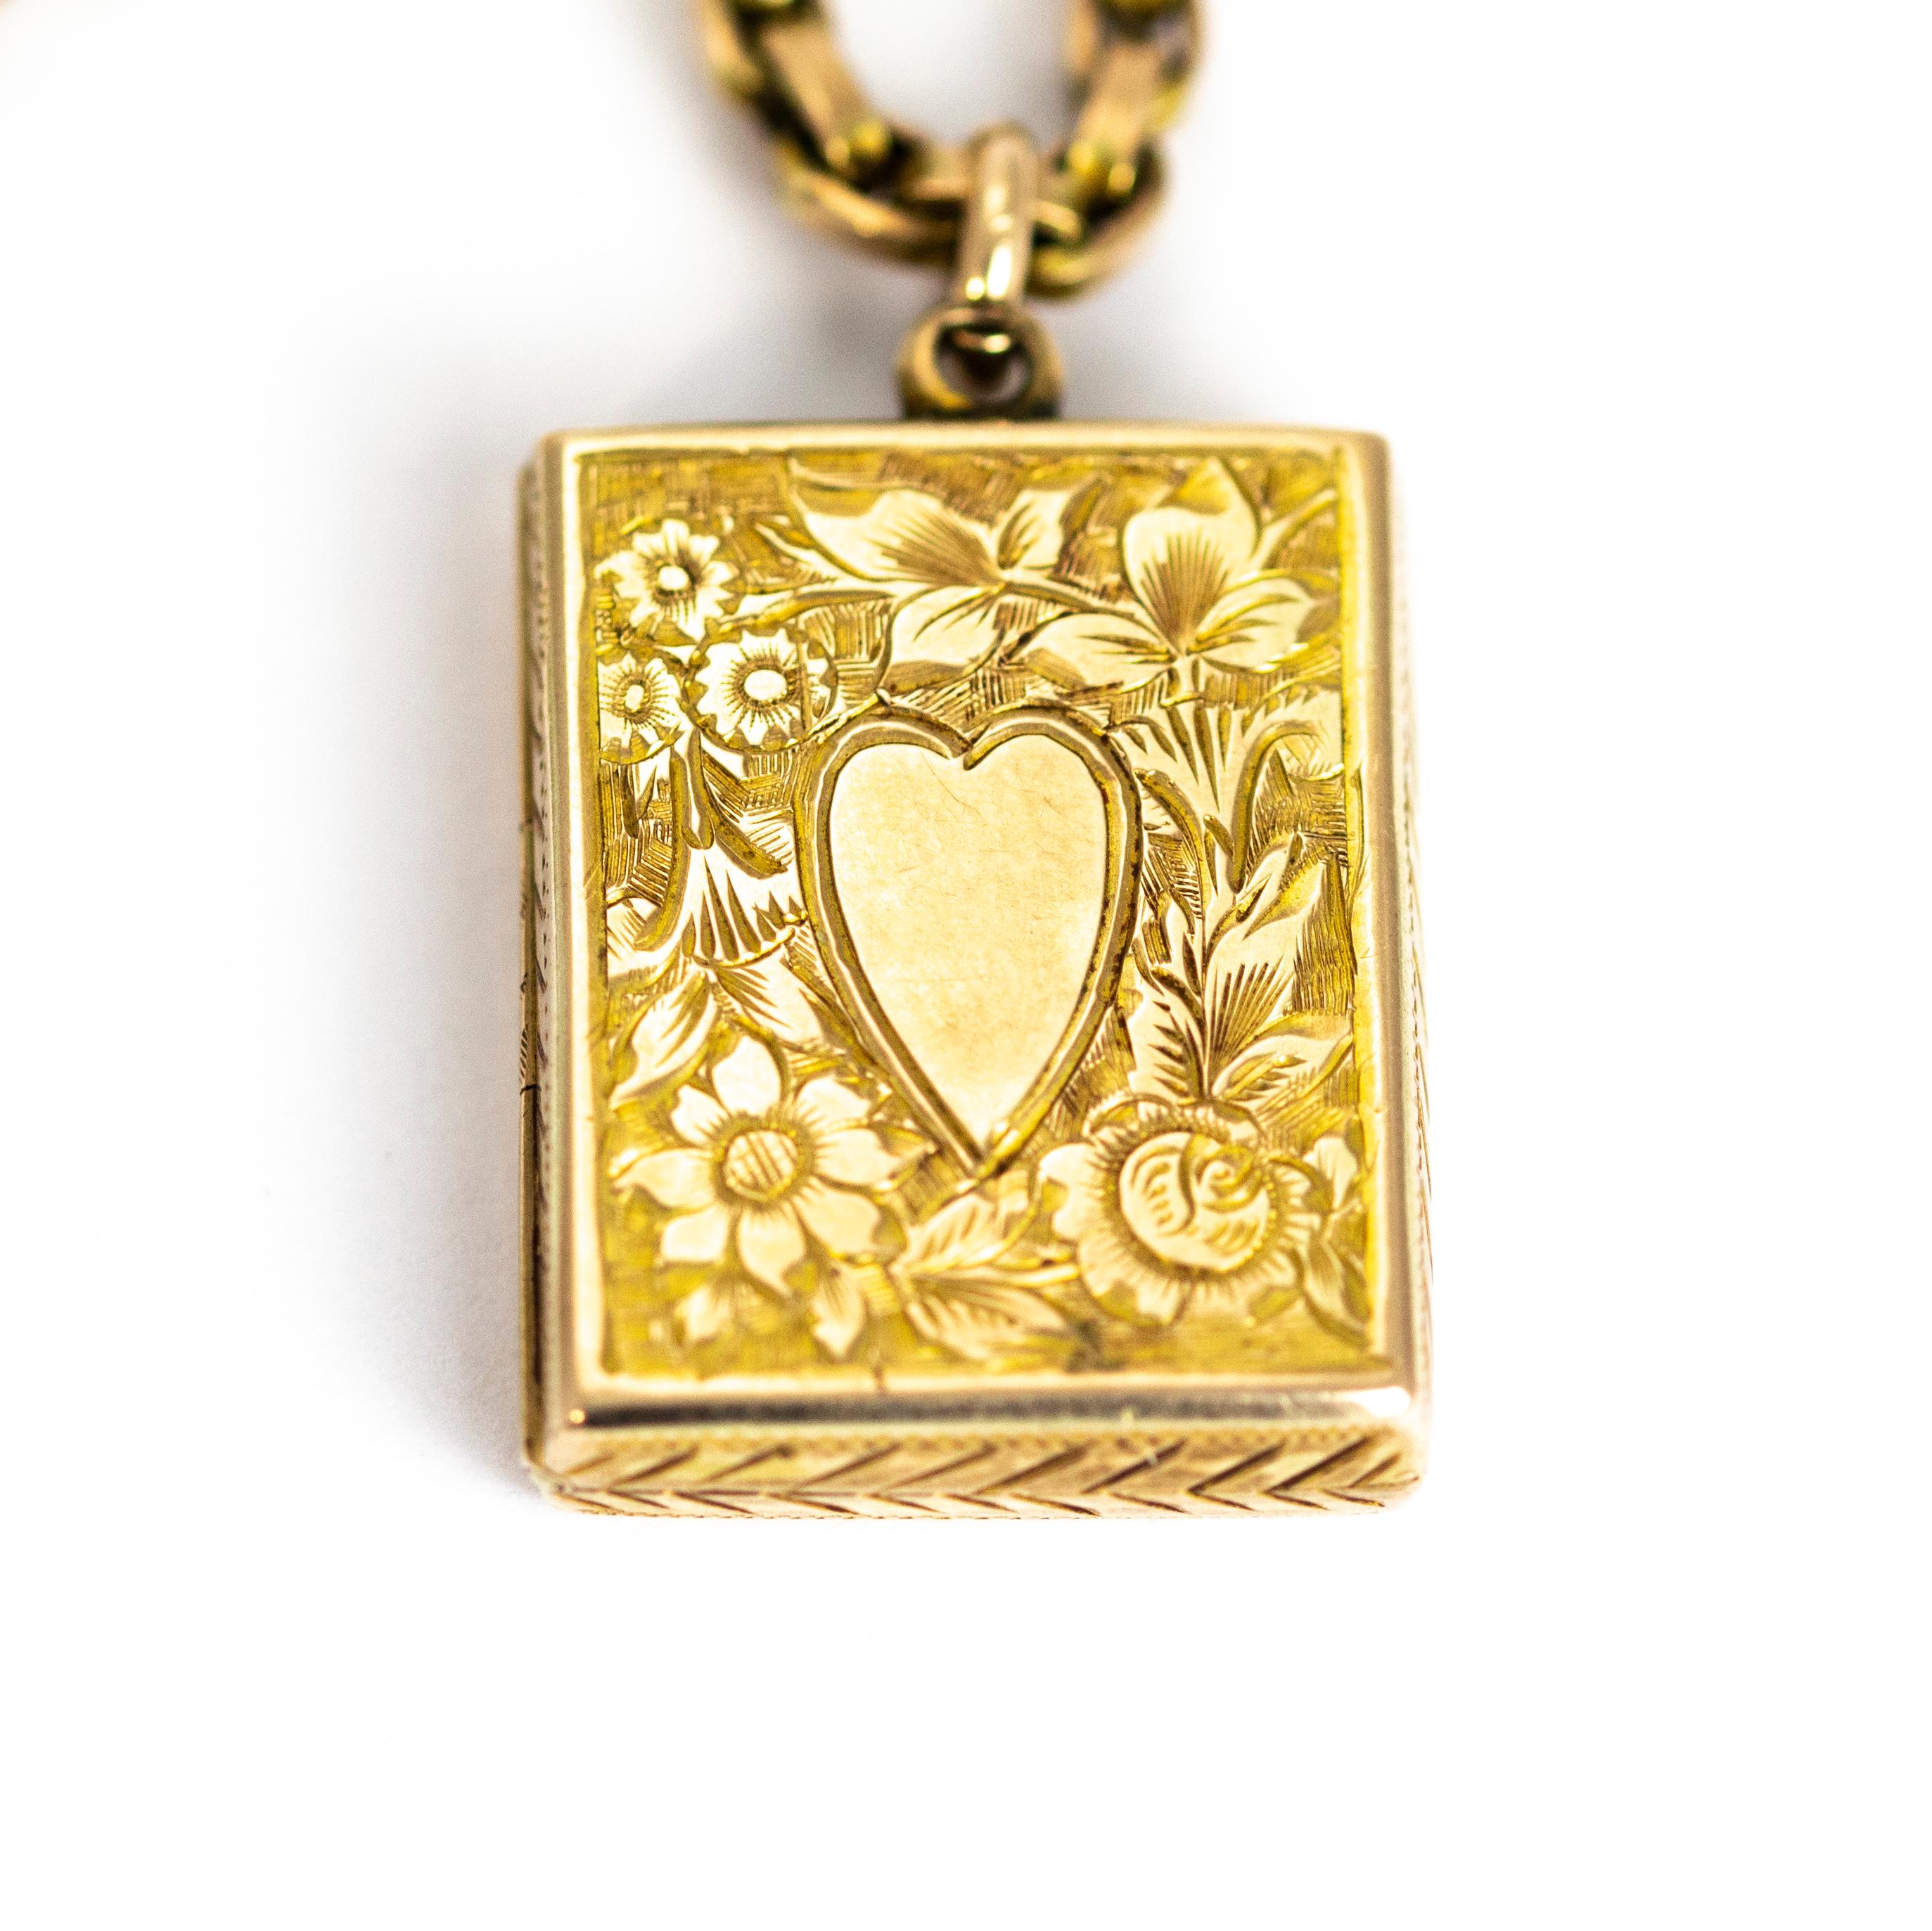 This beautiful delicate locket is held on a chunky longuard complete with a dog clip. The Locket has a leaf motif engraved into it with a shiny heart on the front.

Length 61inches 